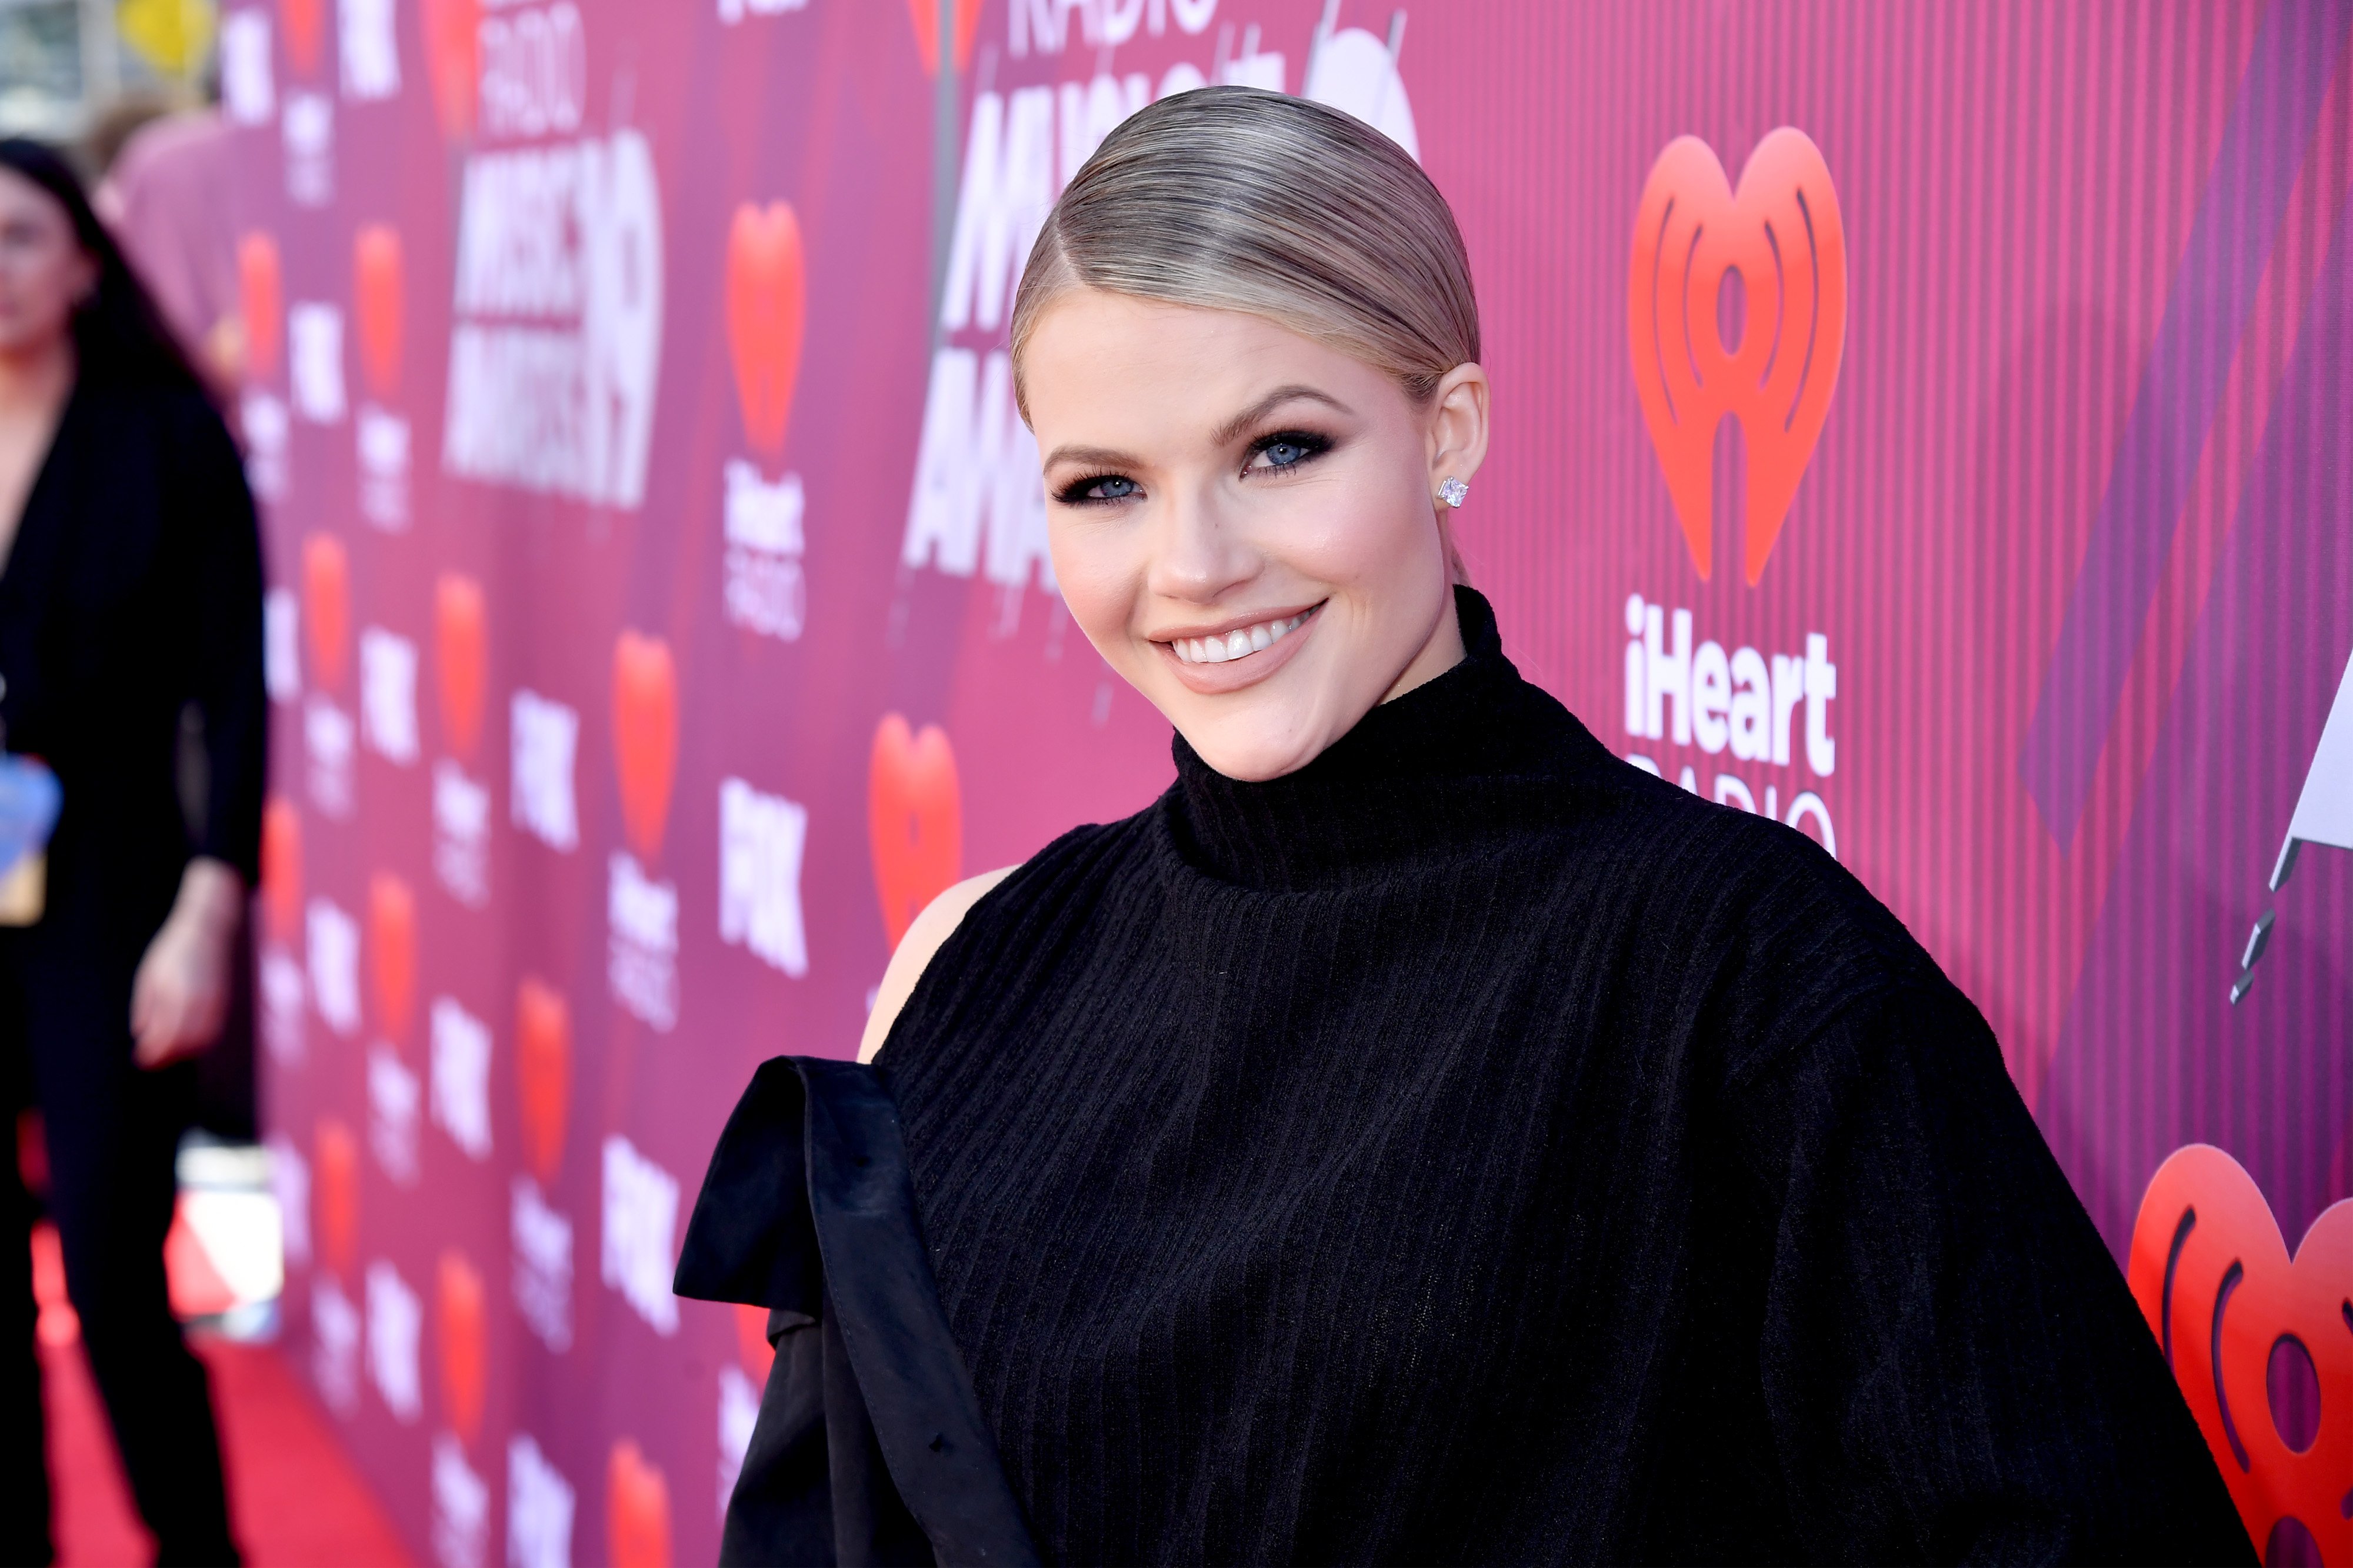 Witney Carson pictured at the 2019 iHeartRadio Music Awards. 2019, California. | Photo: Getty Images